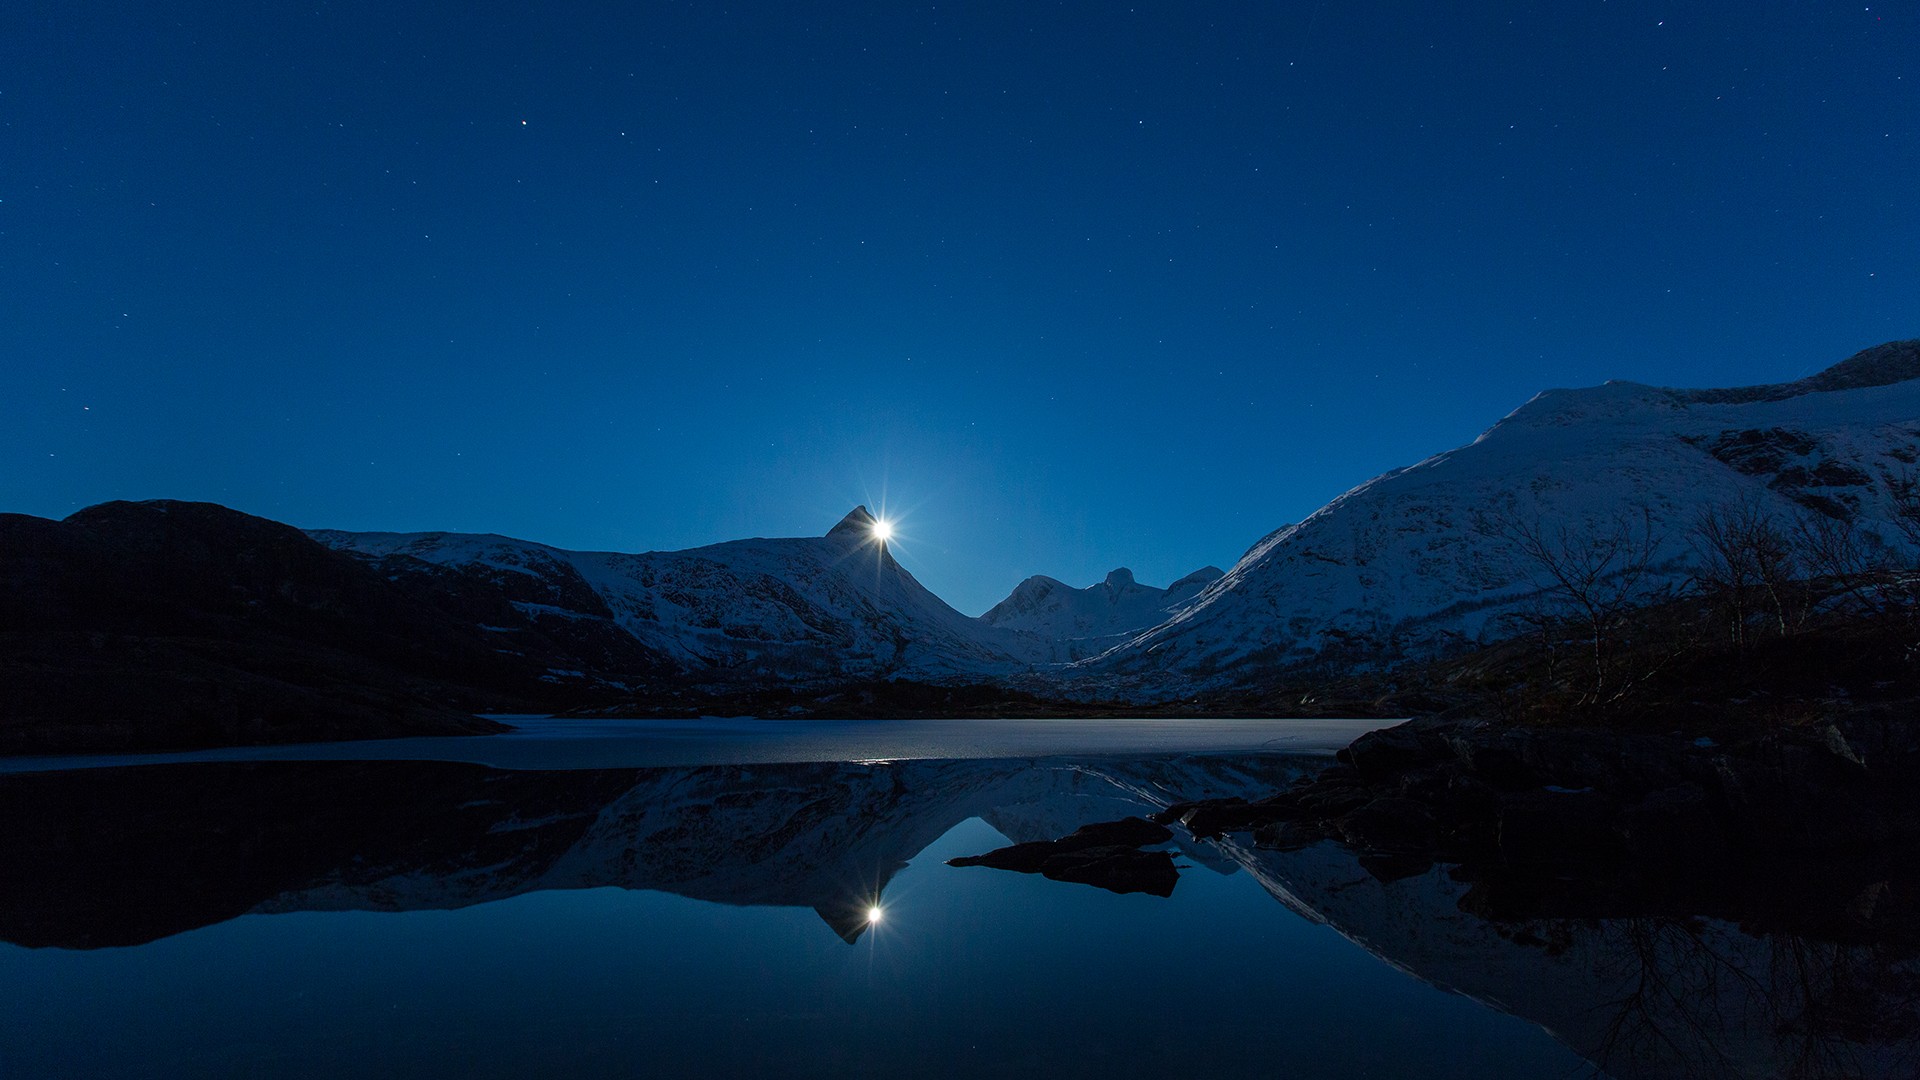 calm waters, Calm, Landscape, Nature, Night, Mountains Wallpaper